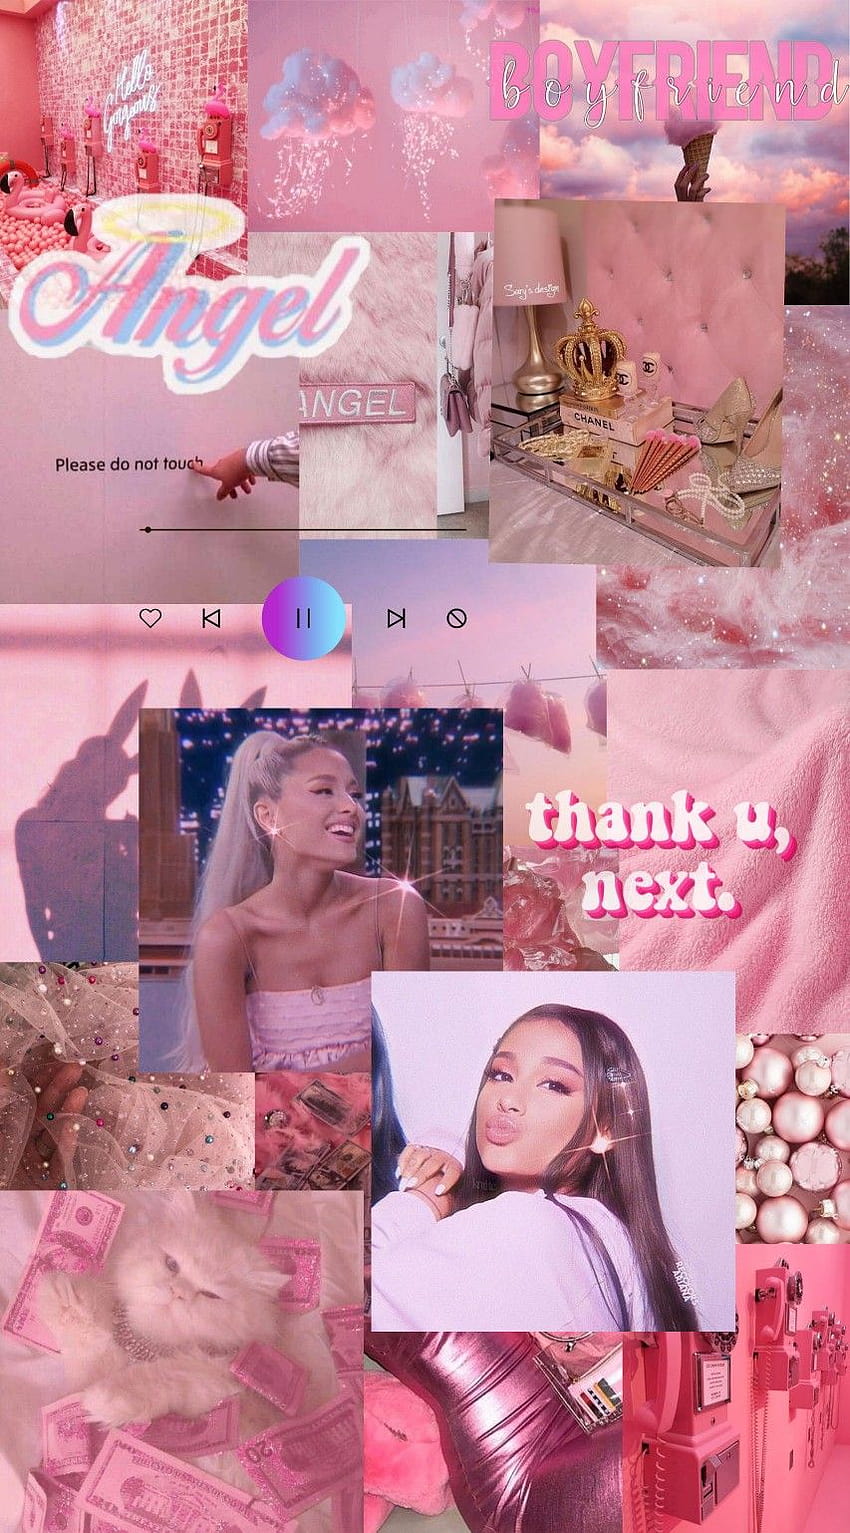 Ariana Grande Aesthetic posted by Sarah Walker, ariana grande collage ...